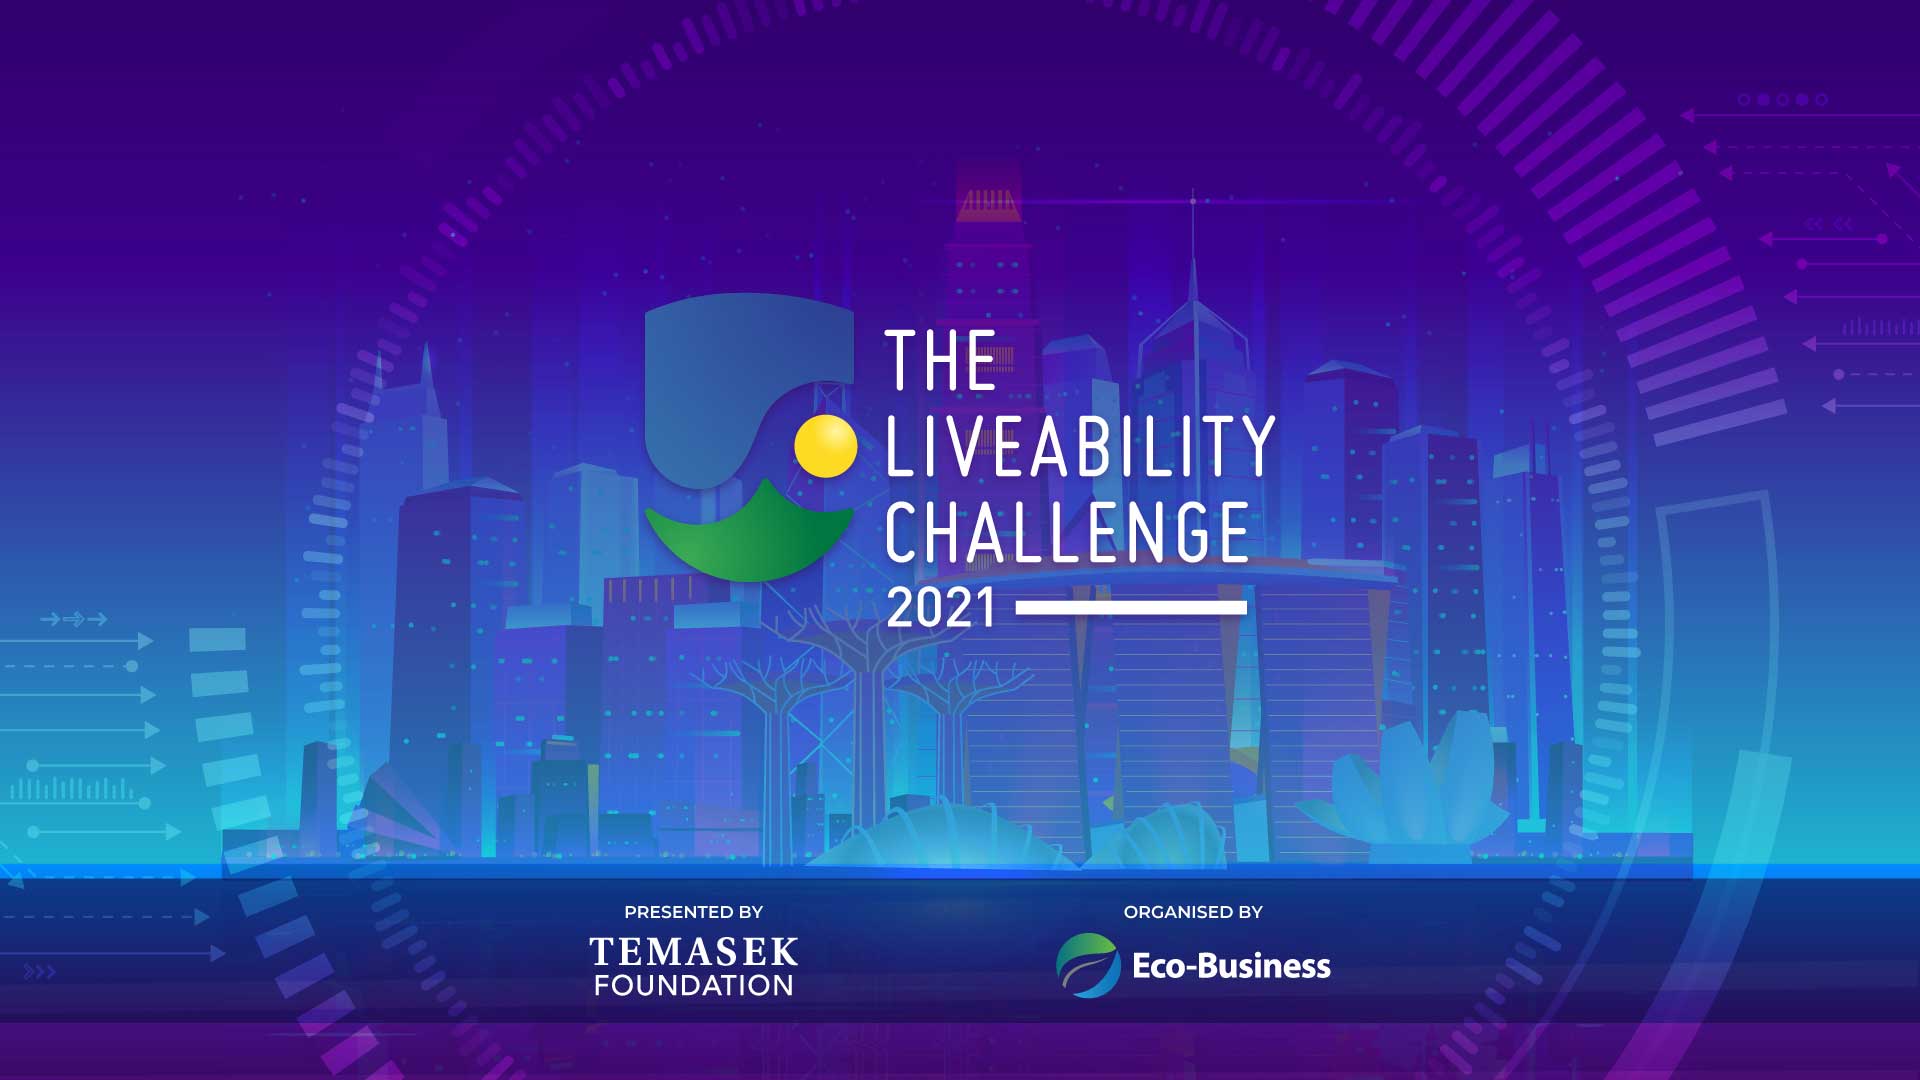 The Liveability Challenge 2021